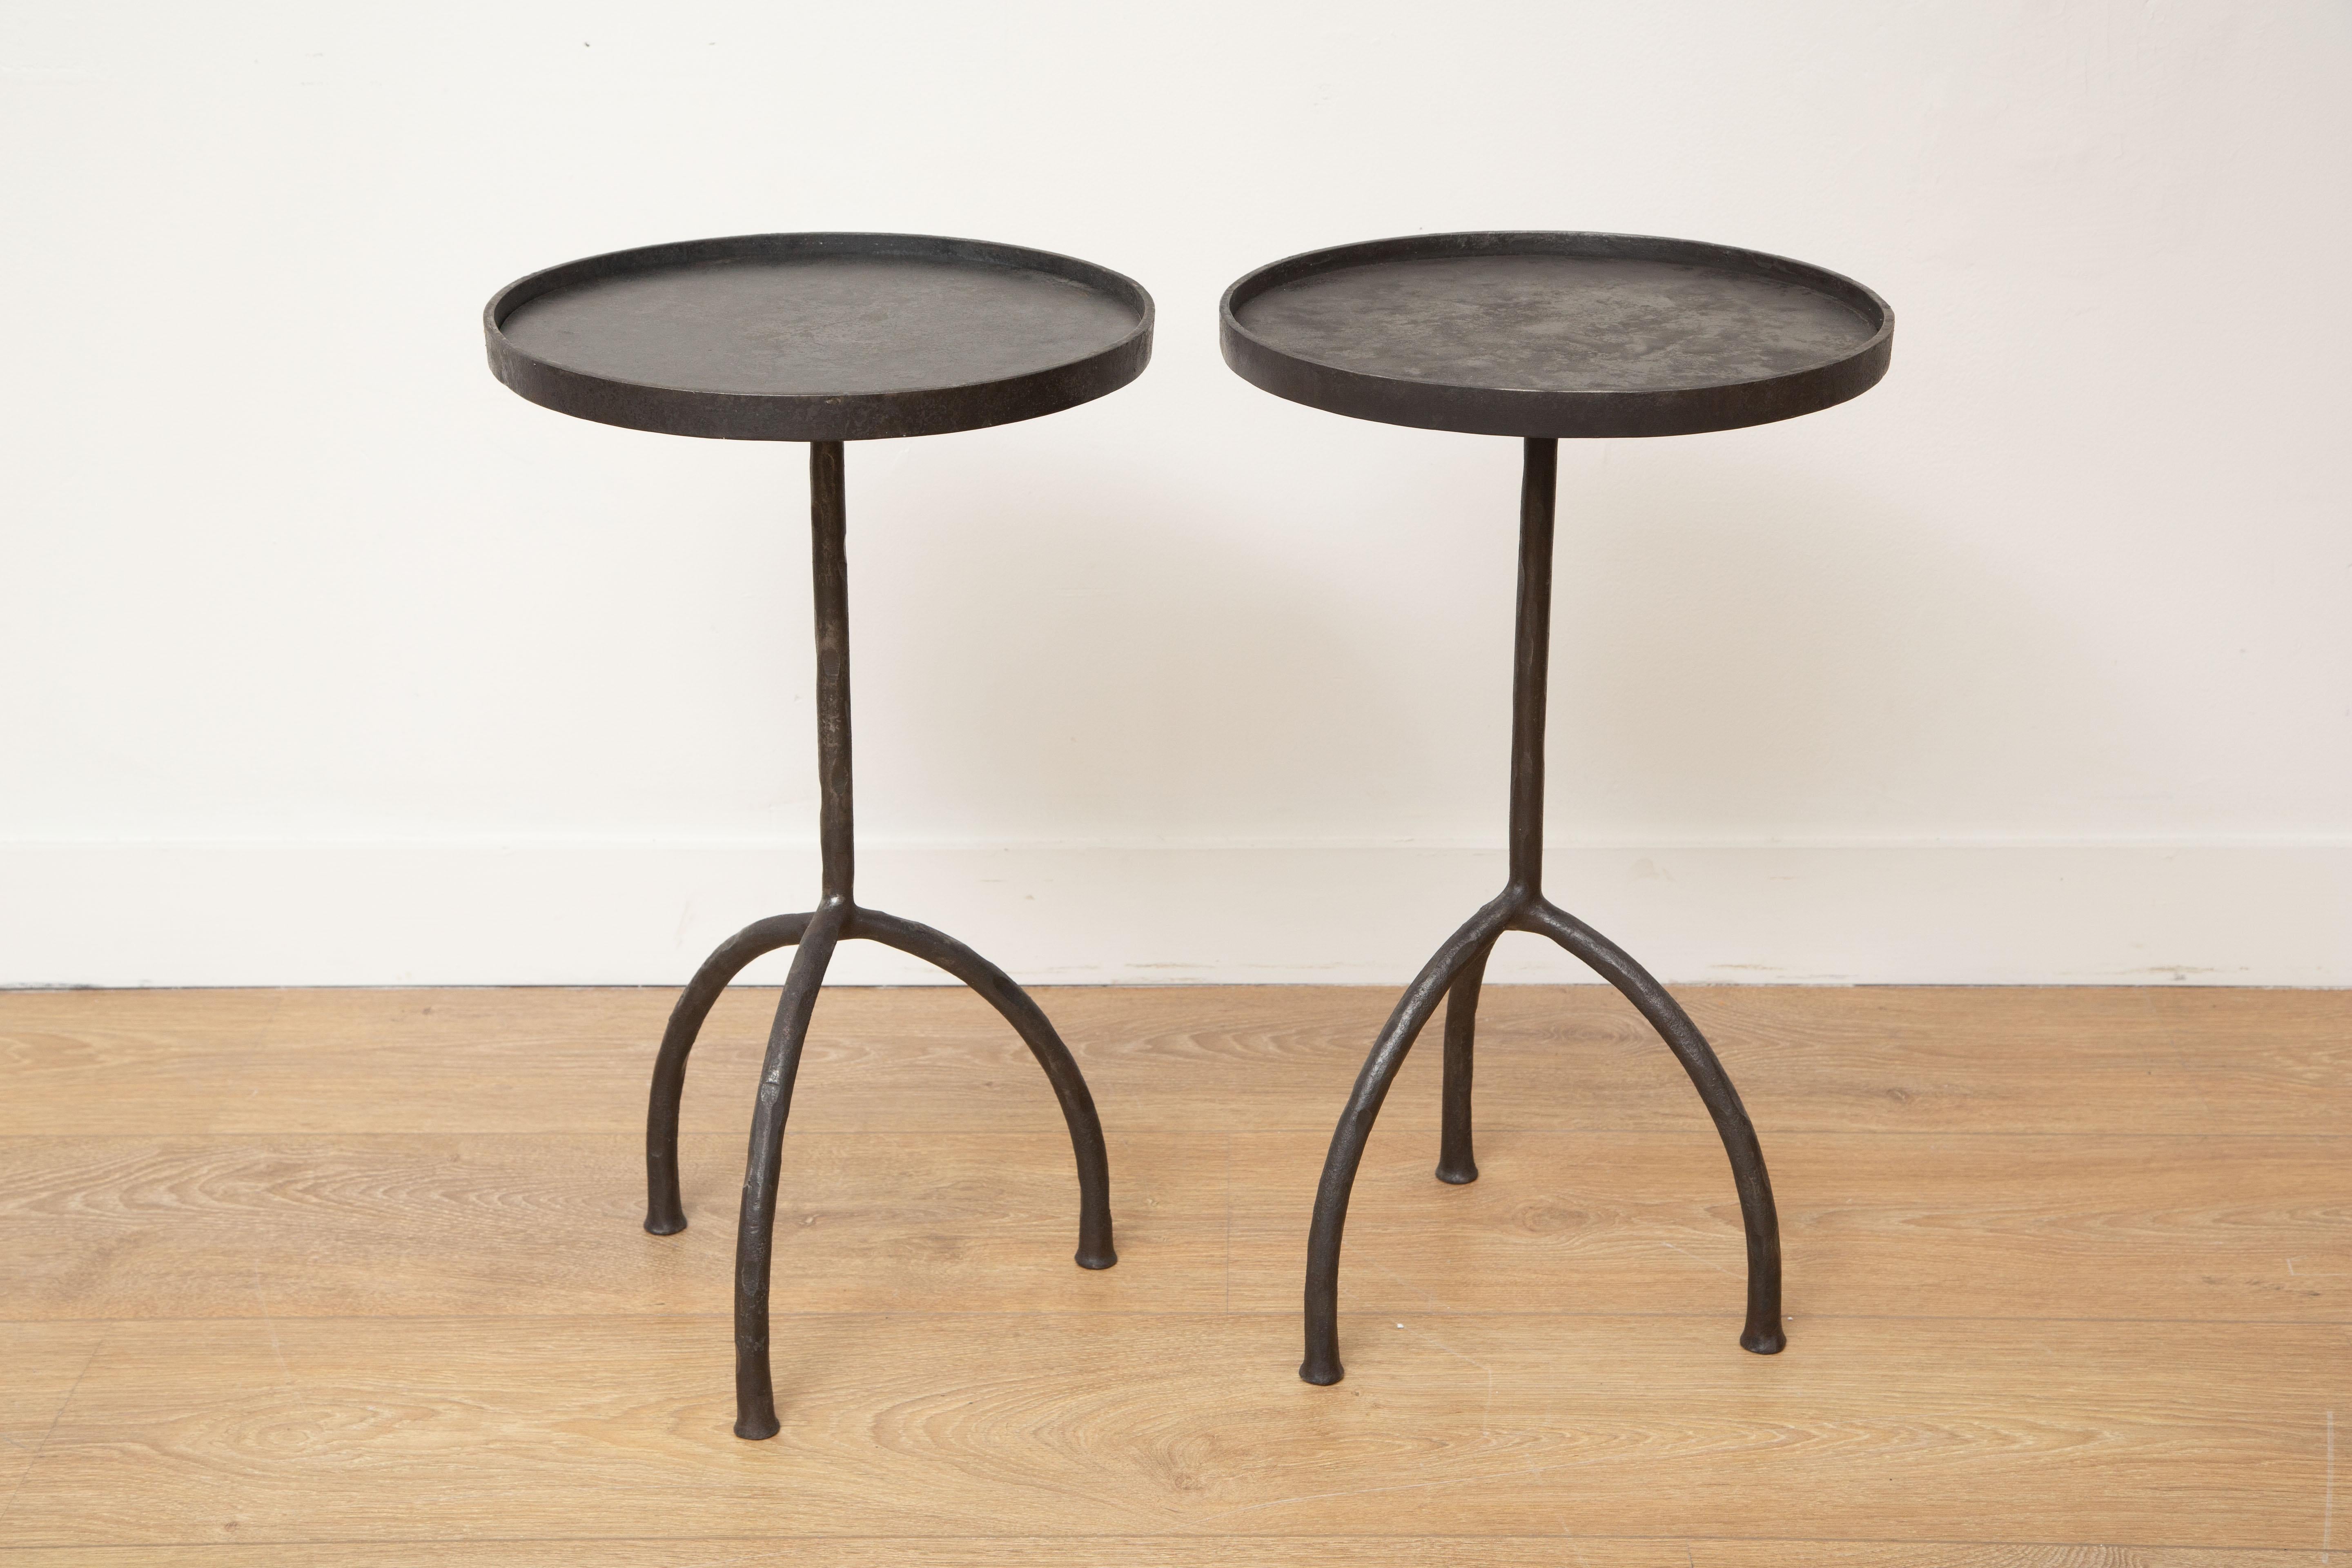 Custom tripod hand-forged side or drinks tables, in stock
Hand-forged iron legs, round top with lip
Dark bronze patina
Perfect for drinks, side, end tables
Can be sold individually
Ready to ship from our showroom in Miami.